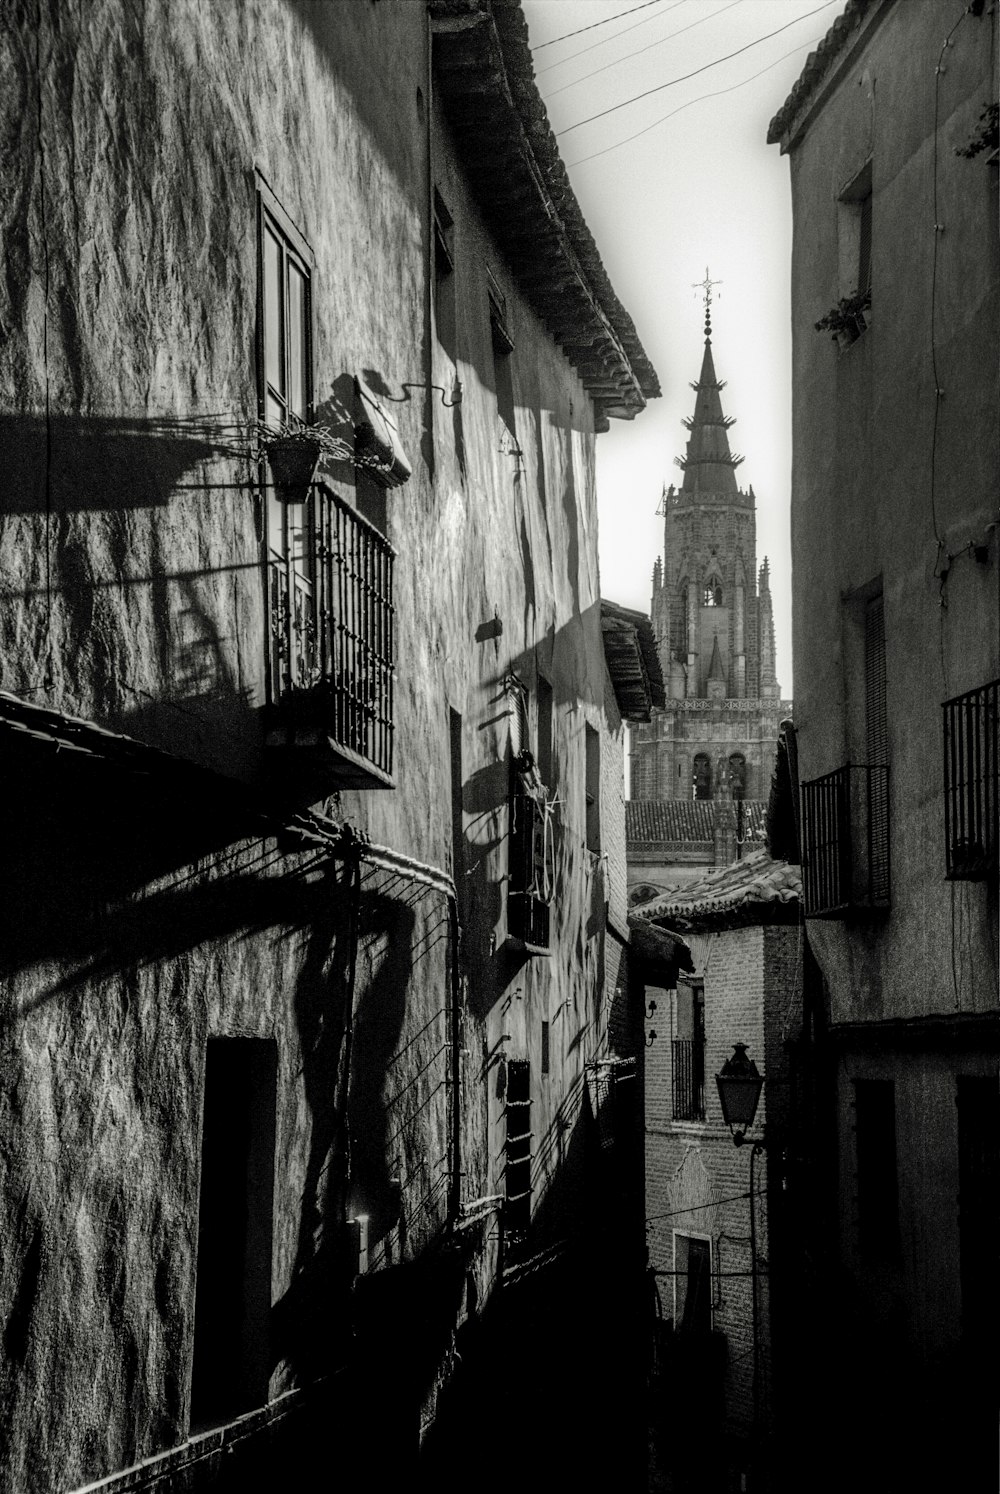 a black and white photo of a steeple and buildings